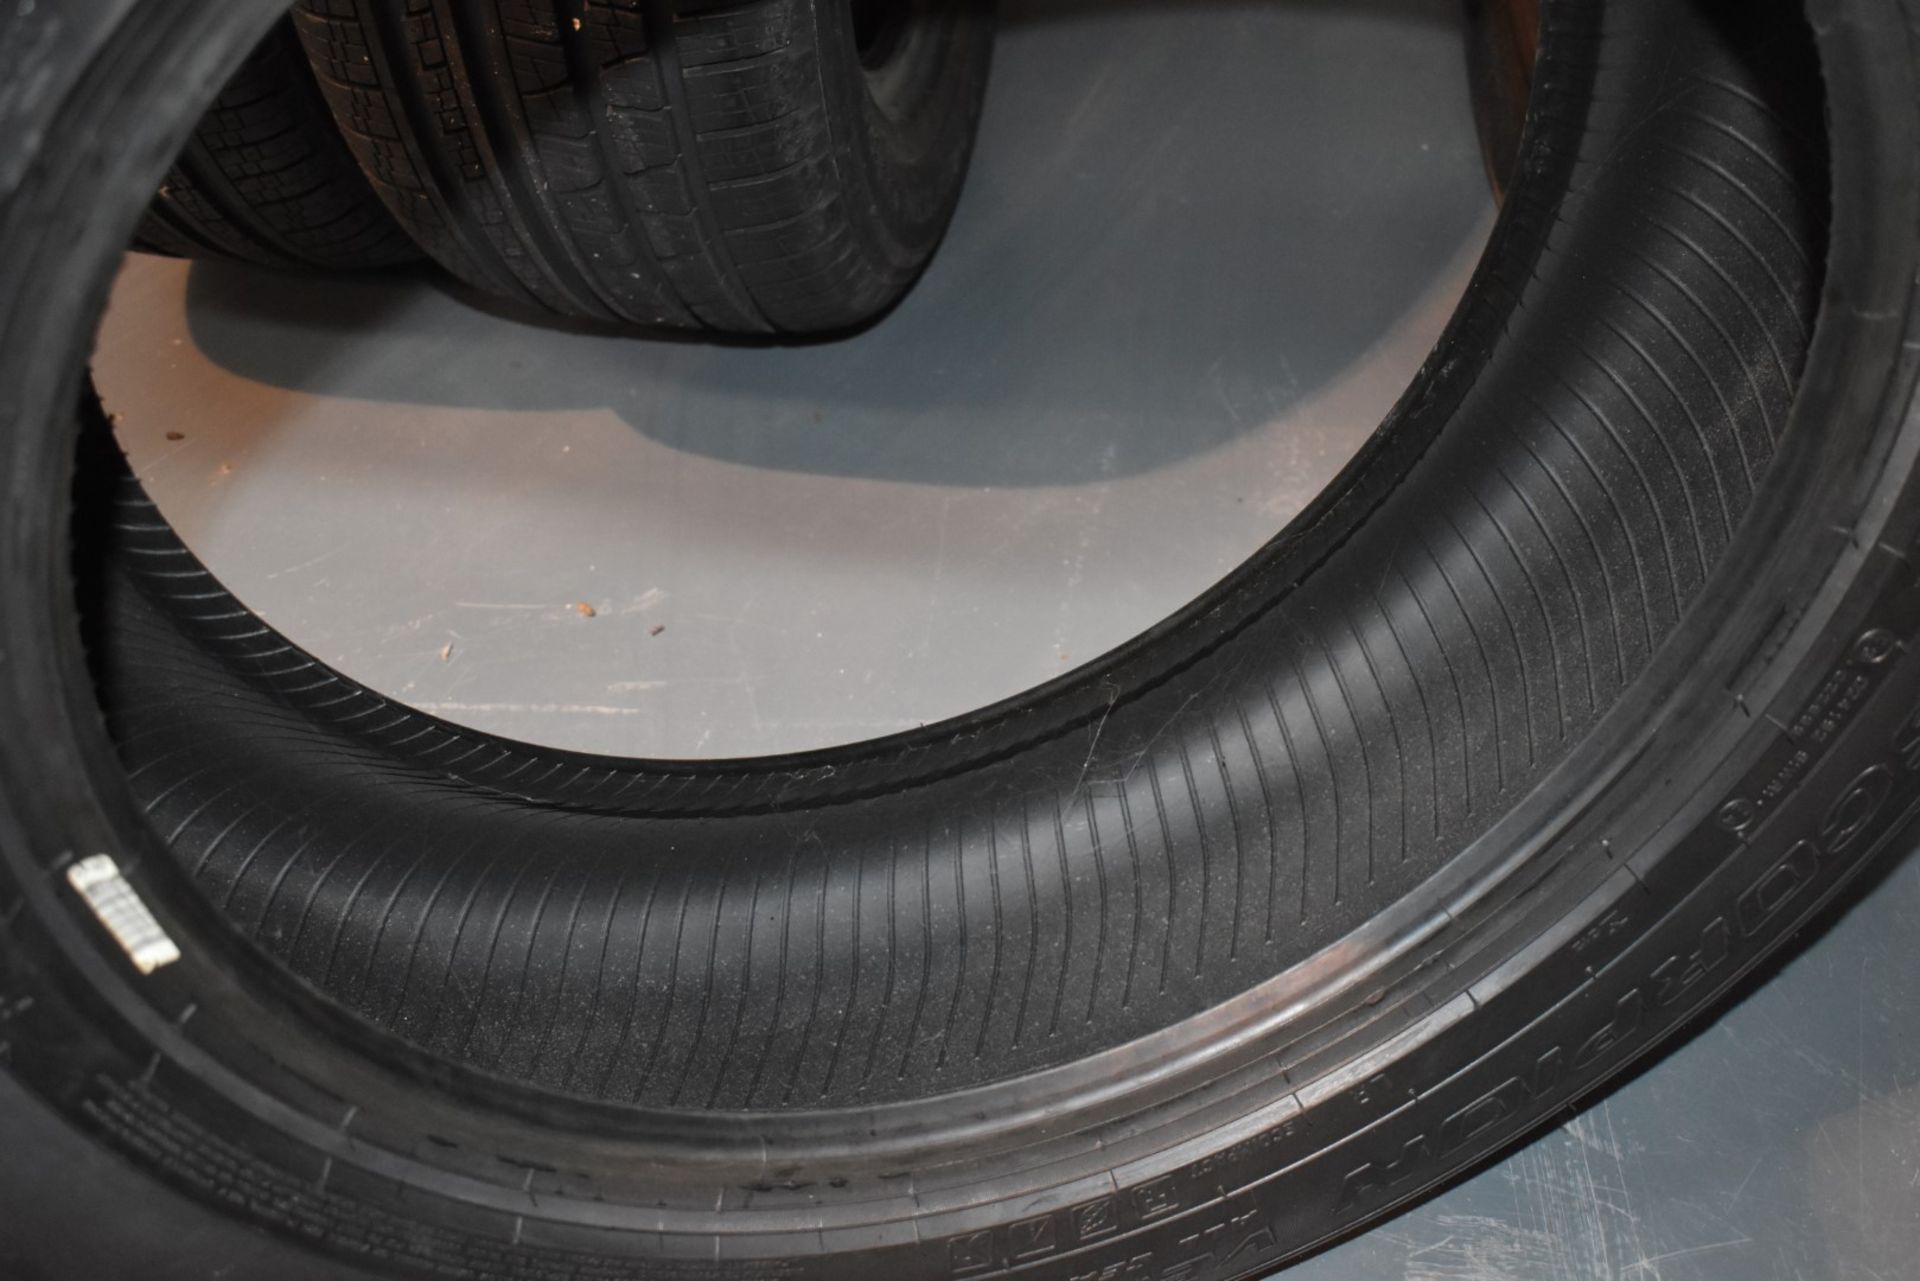 4 x Land Rover Discovery Sport Tyres - Pirelli Scorpion 235-60 R18 - Set of Four New and Unused - Image 14 of 14